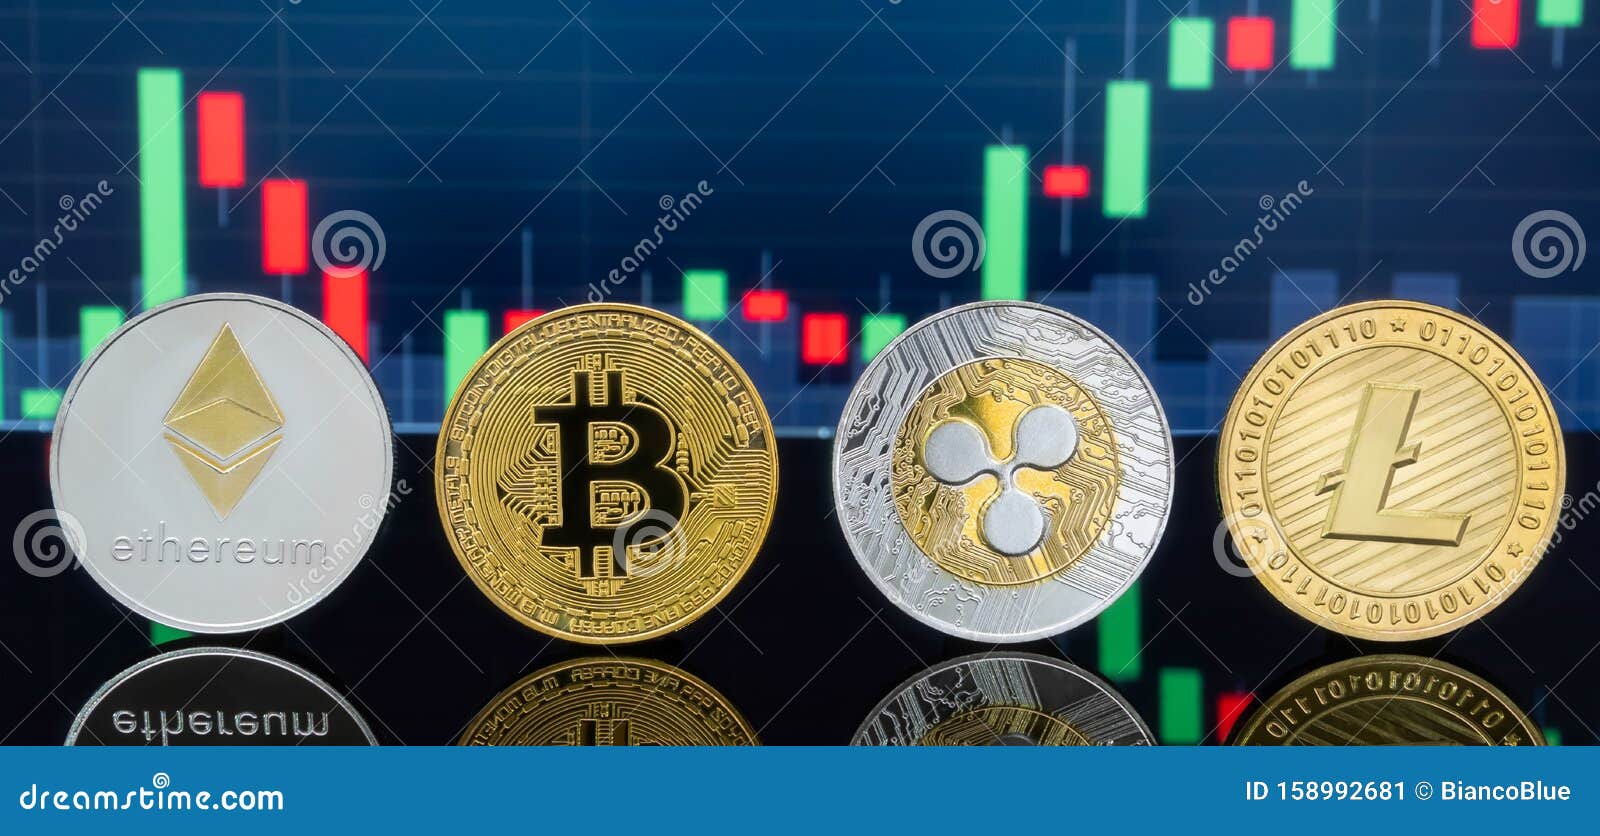 Bitcoin And Cryptocurrency Investing Concept Stock Image ...